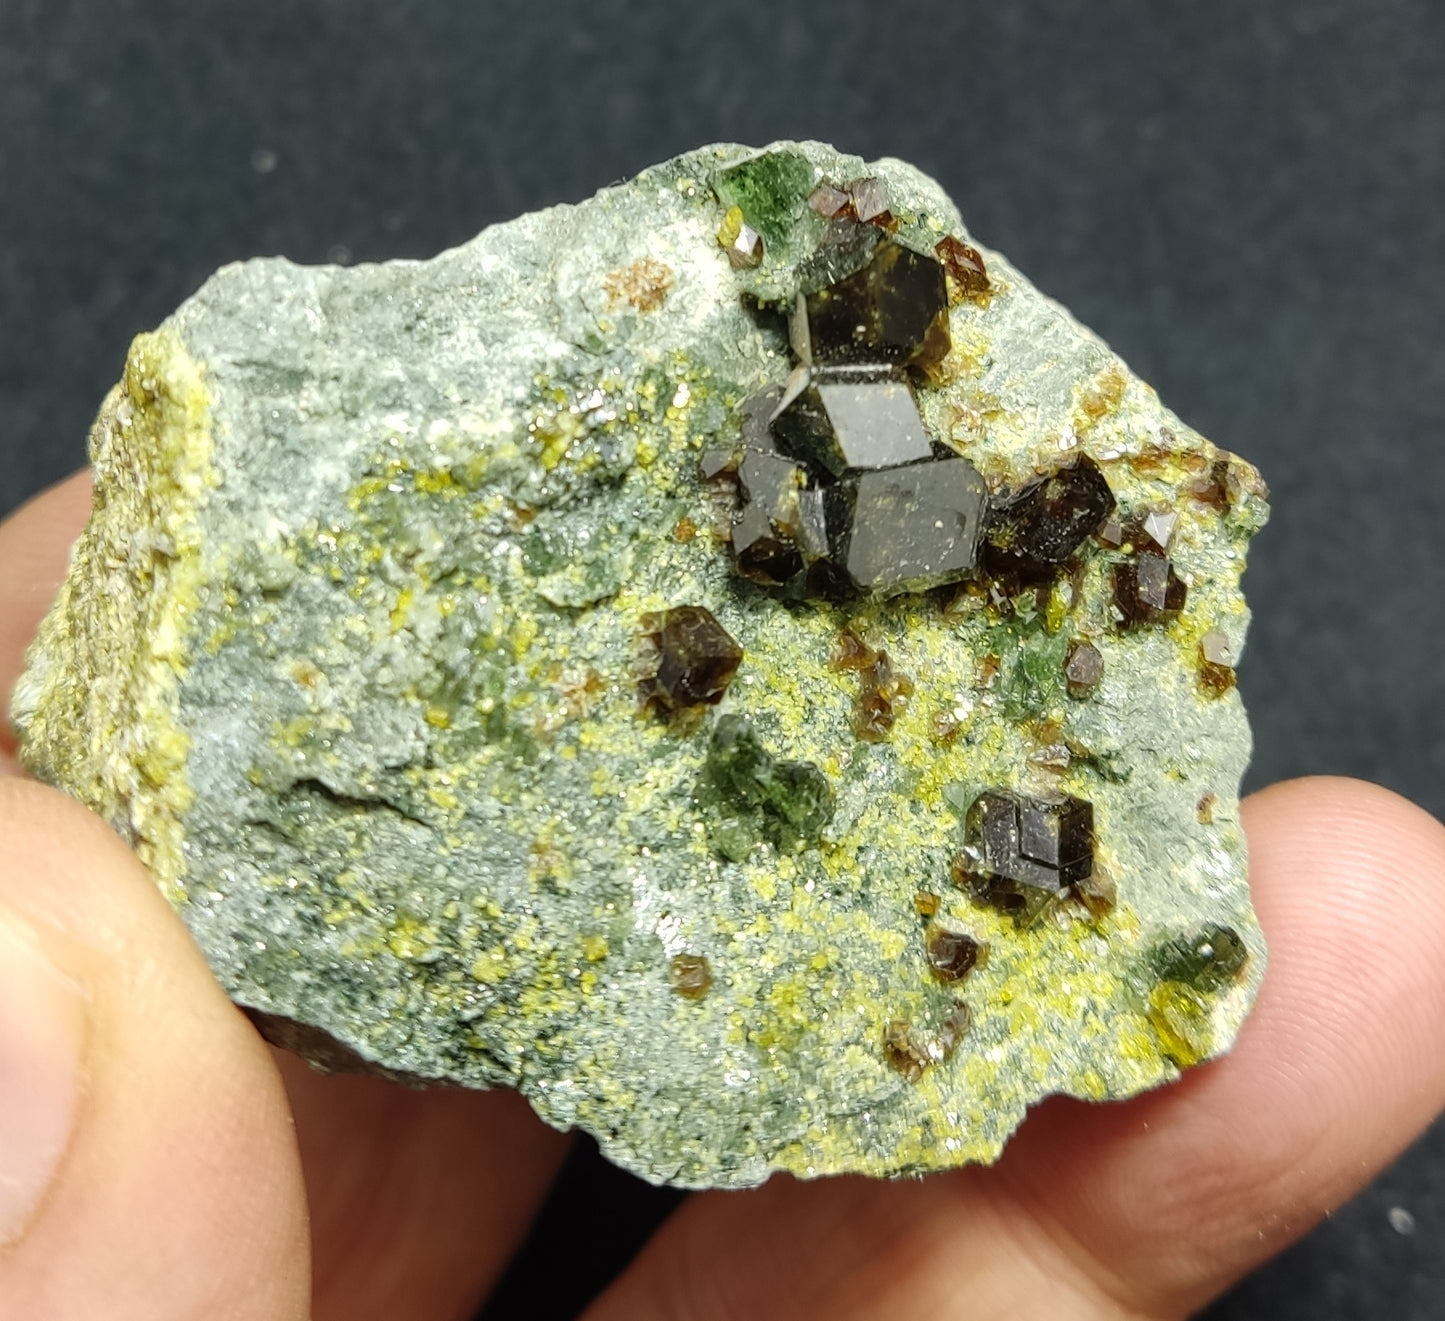 Andradite garnets on matrix with diopside and epidote 128 grams